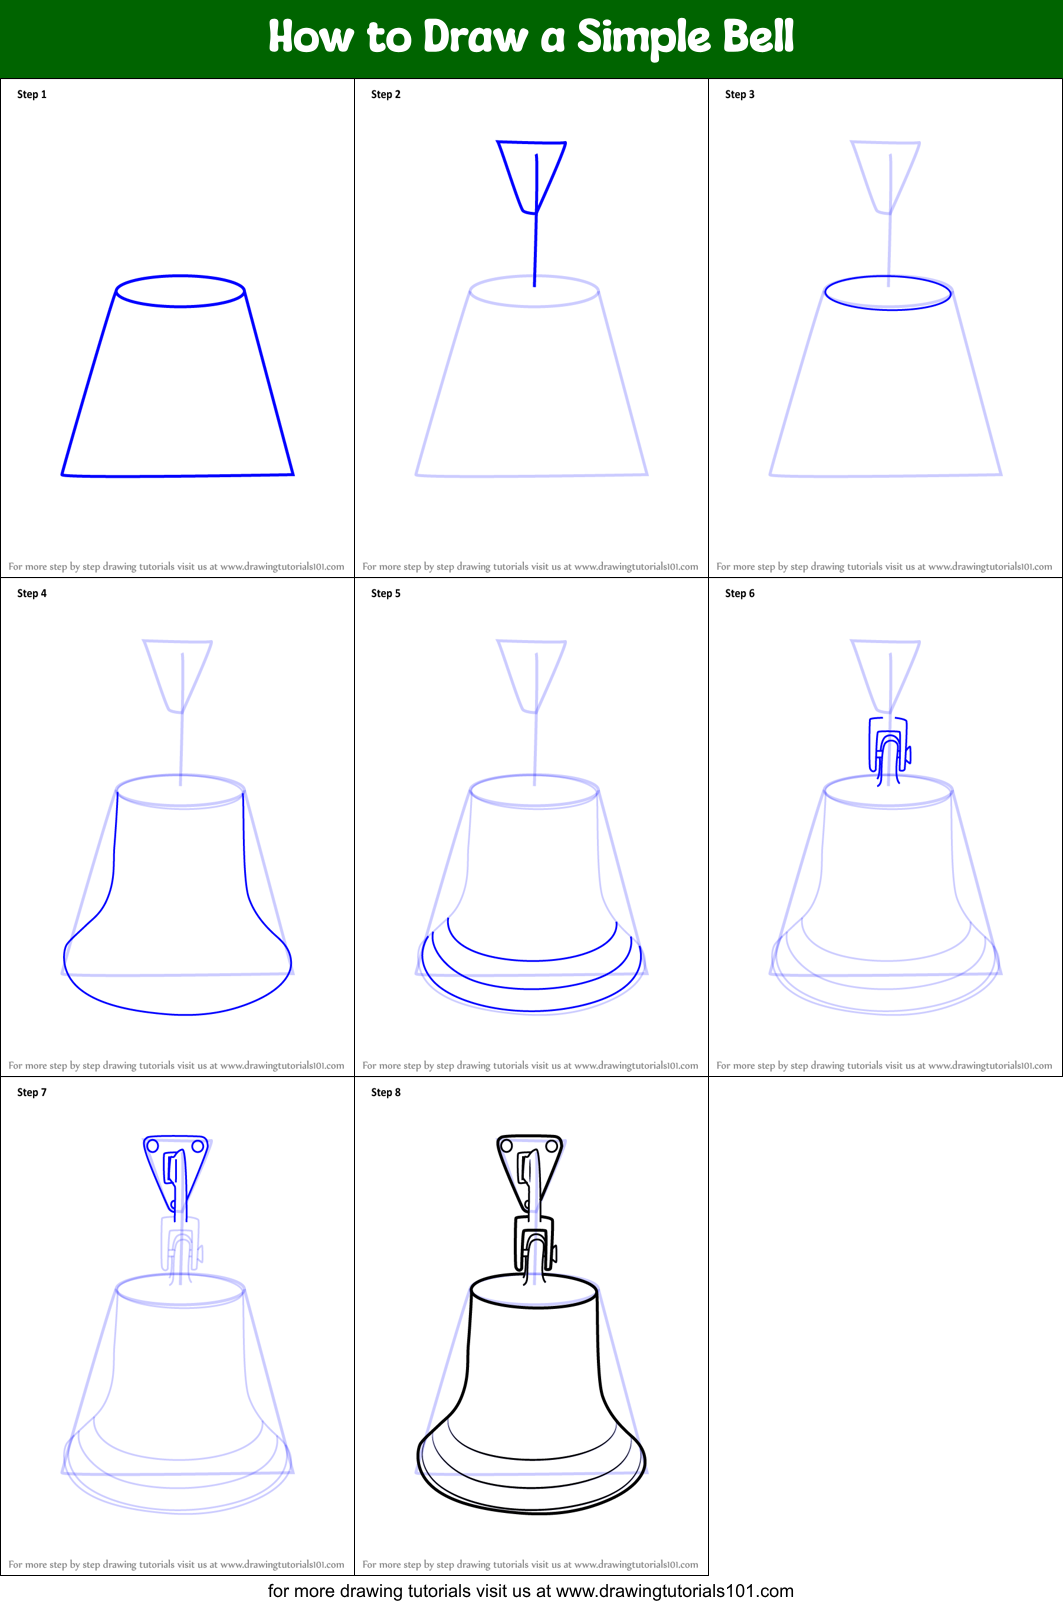 How to Draw a Simple Bell printable step by step drawing sheet